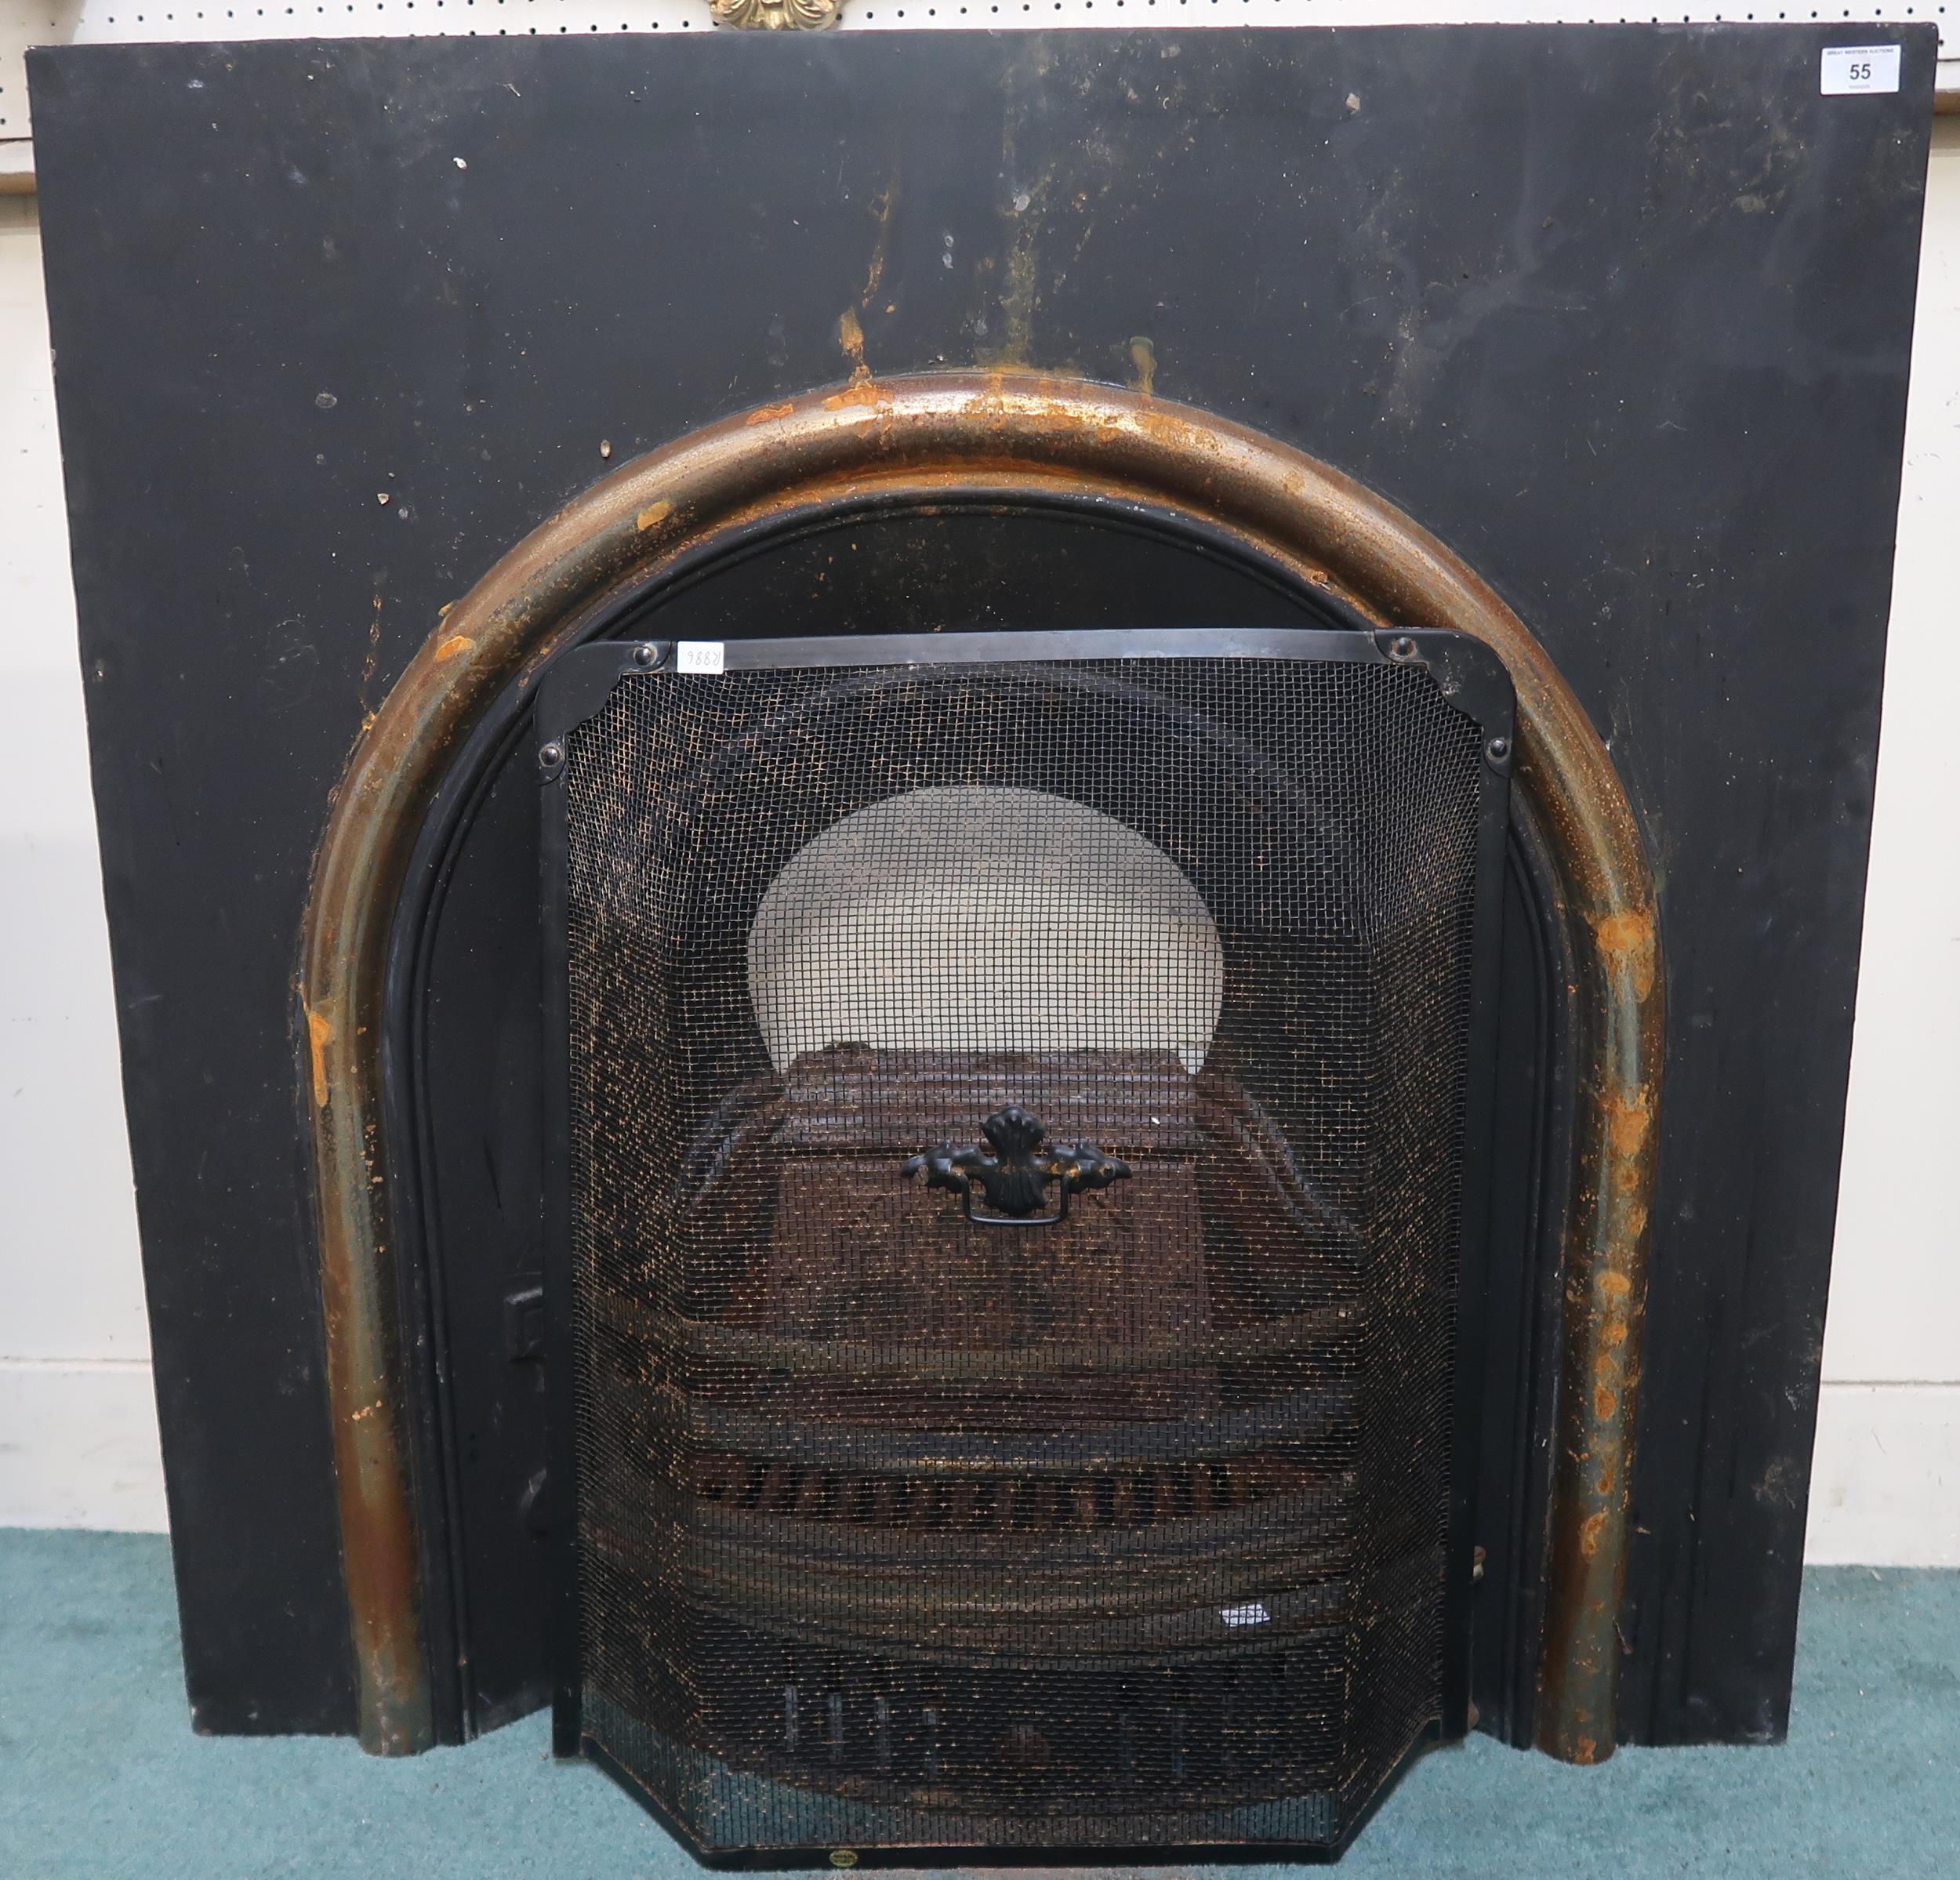 A Victorian cast iron fire place insert with integrated fire basket, 96cm high x 96cm wide x 26cm